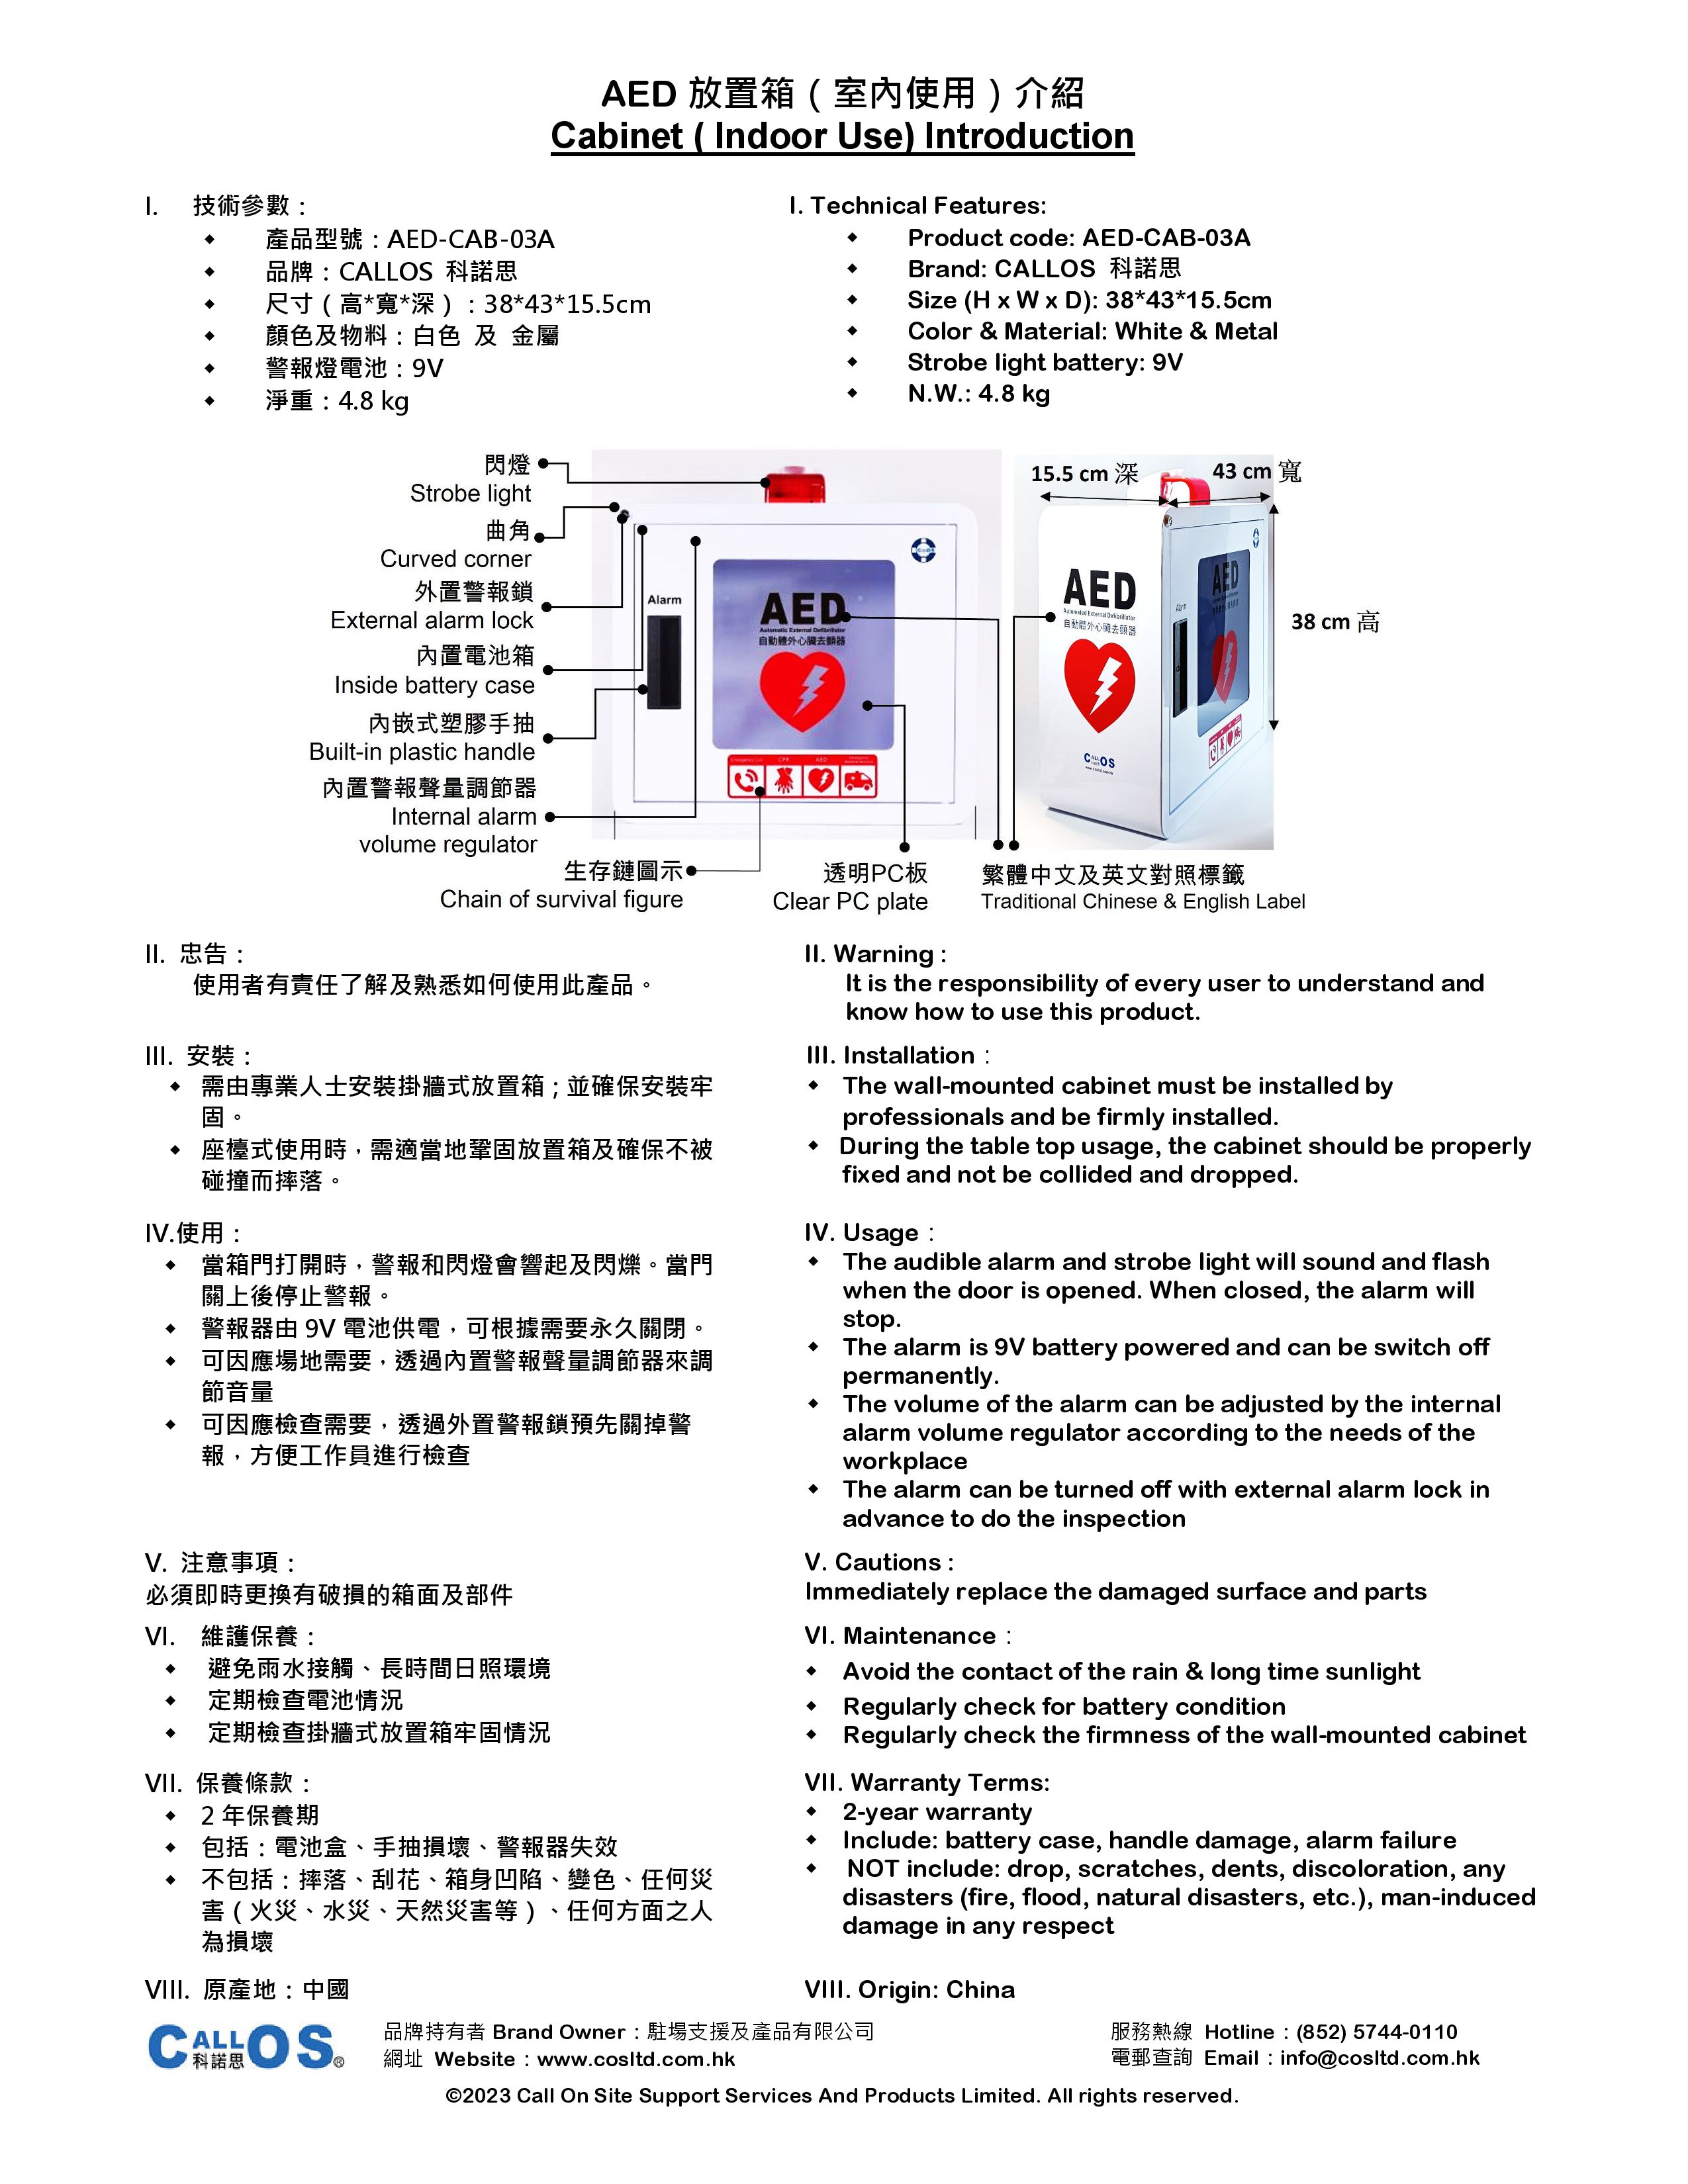 AED Cabinet 